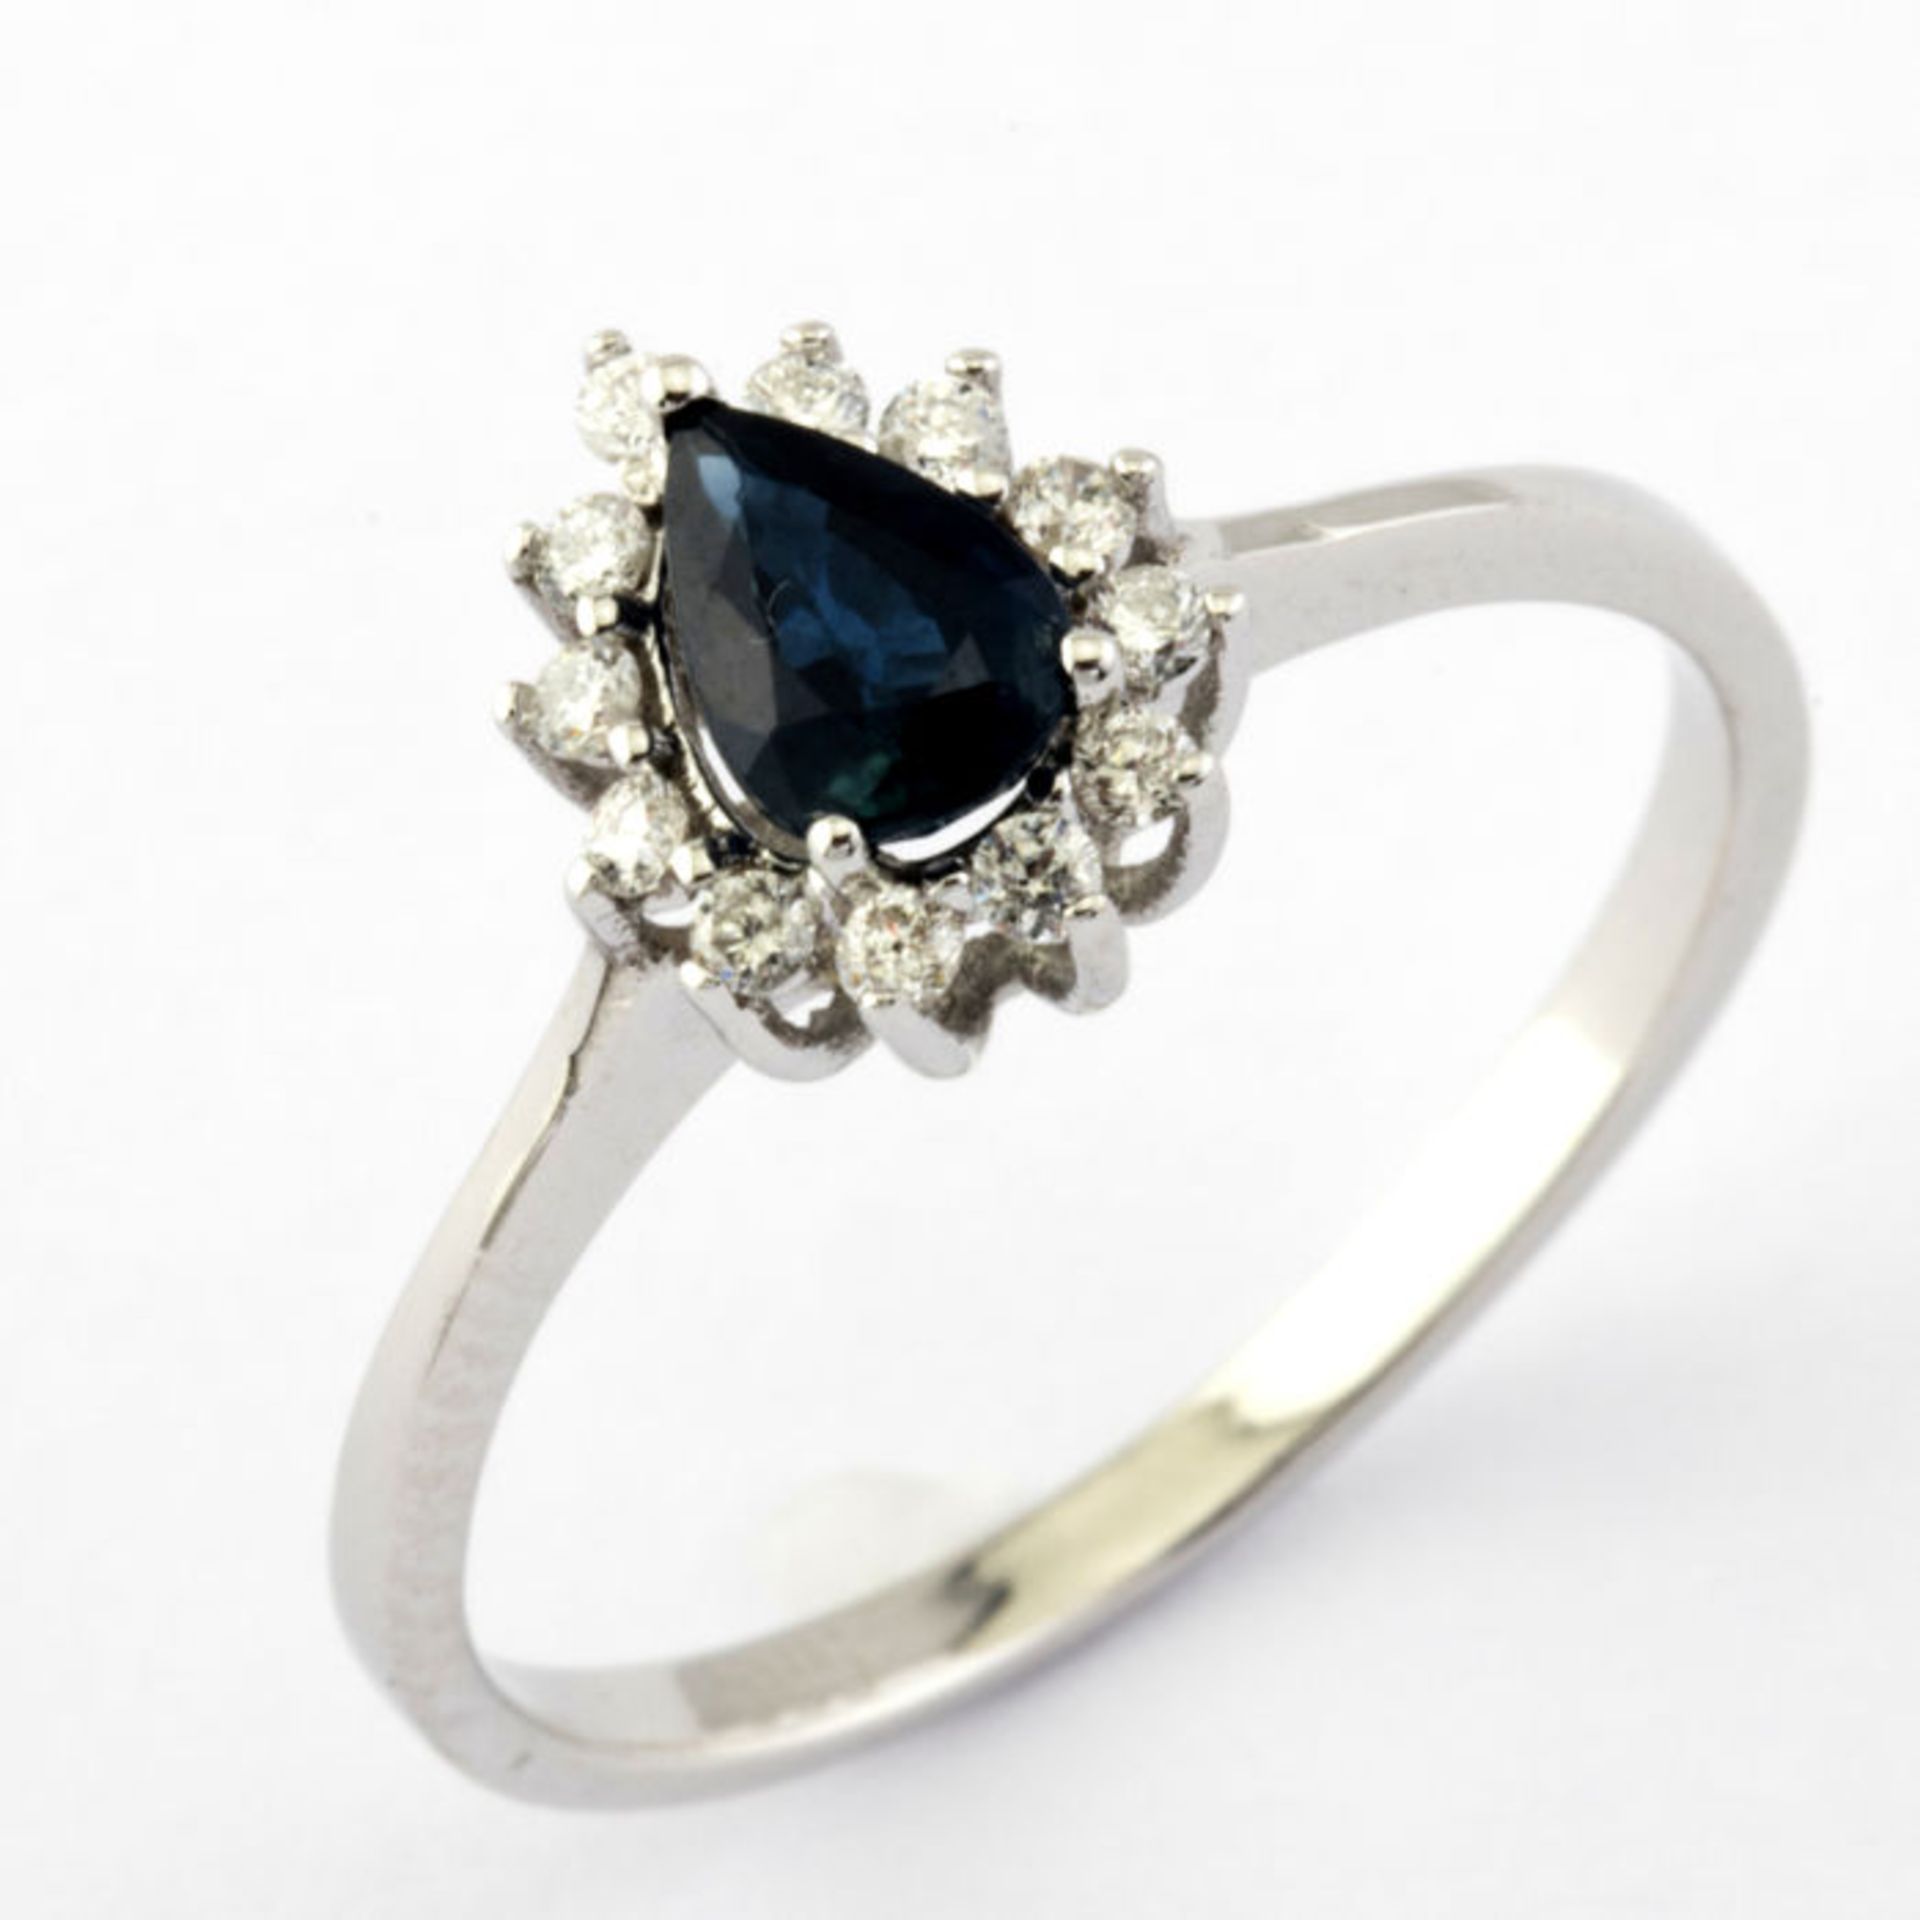 14K White Gold Cluster Ring set with a natural sapphire & 12 brilliant cut diamonds 0,75ct in total